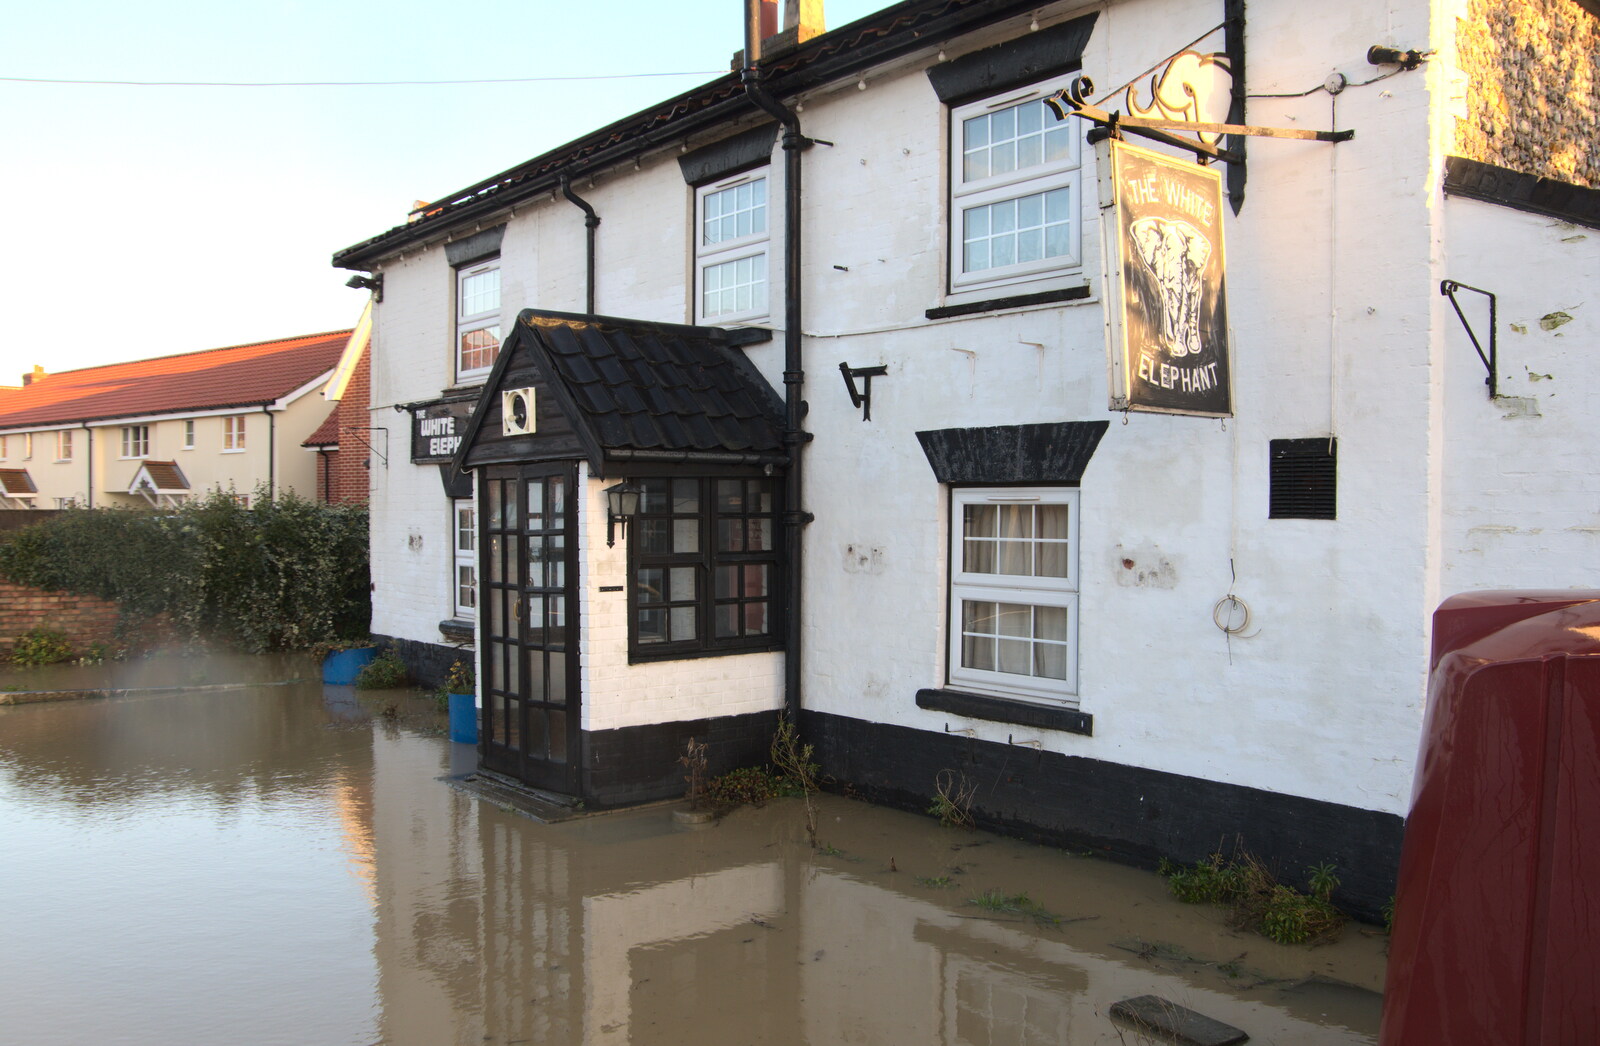 The White Elephant is surrounded by water from The Christmas Eve Floods, Diss, Norfolk - 24th December 2020